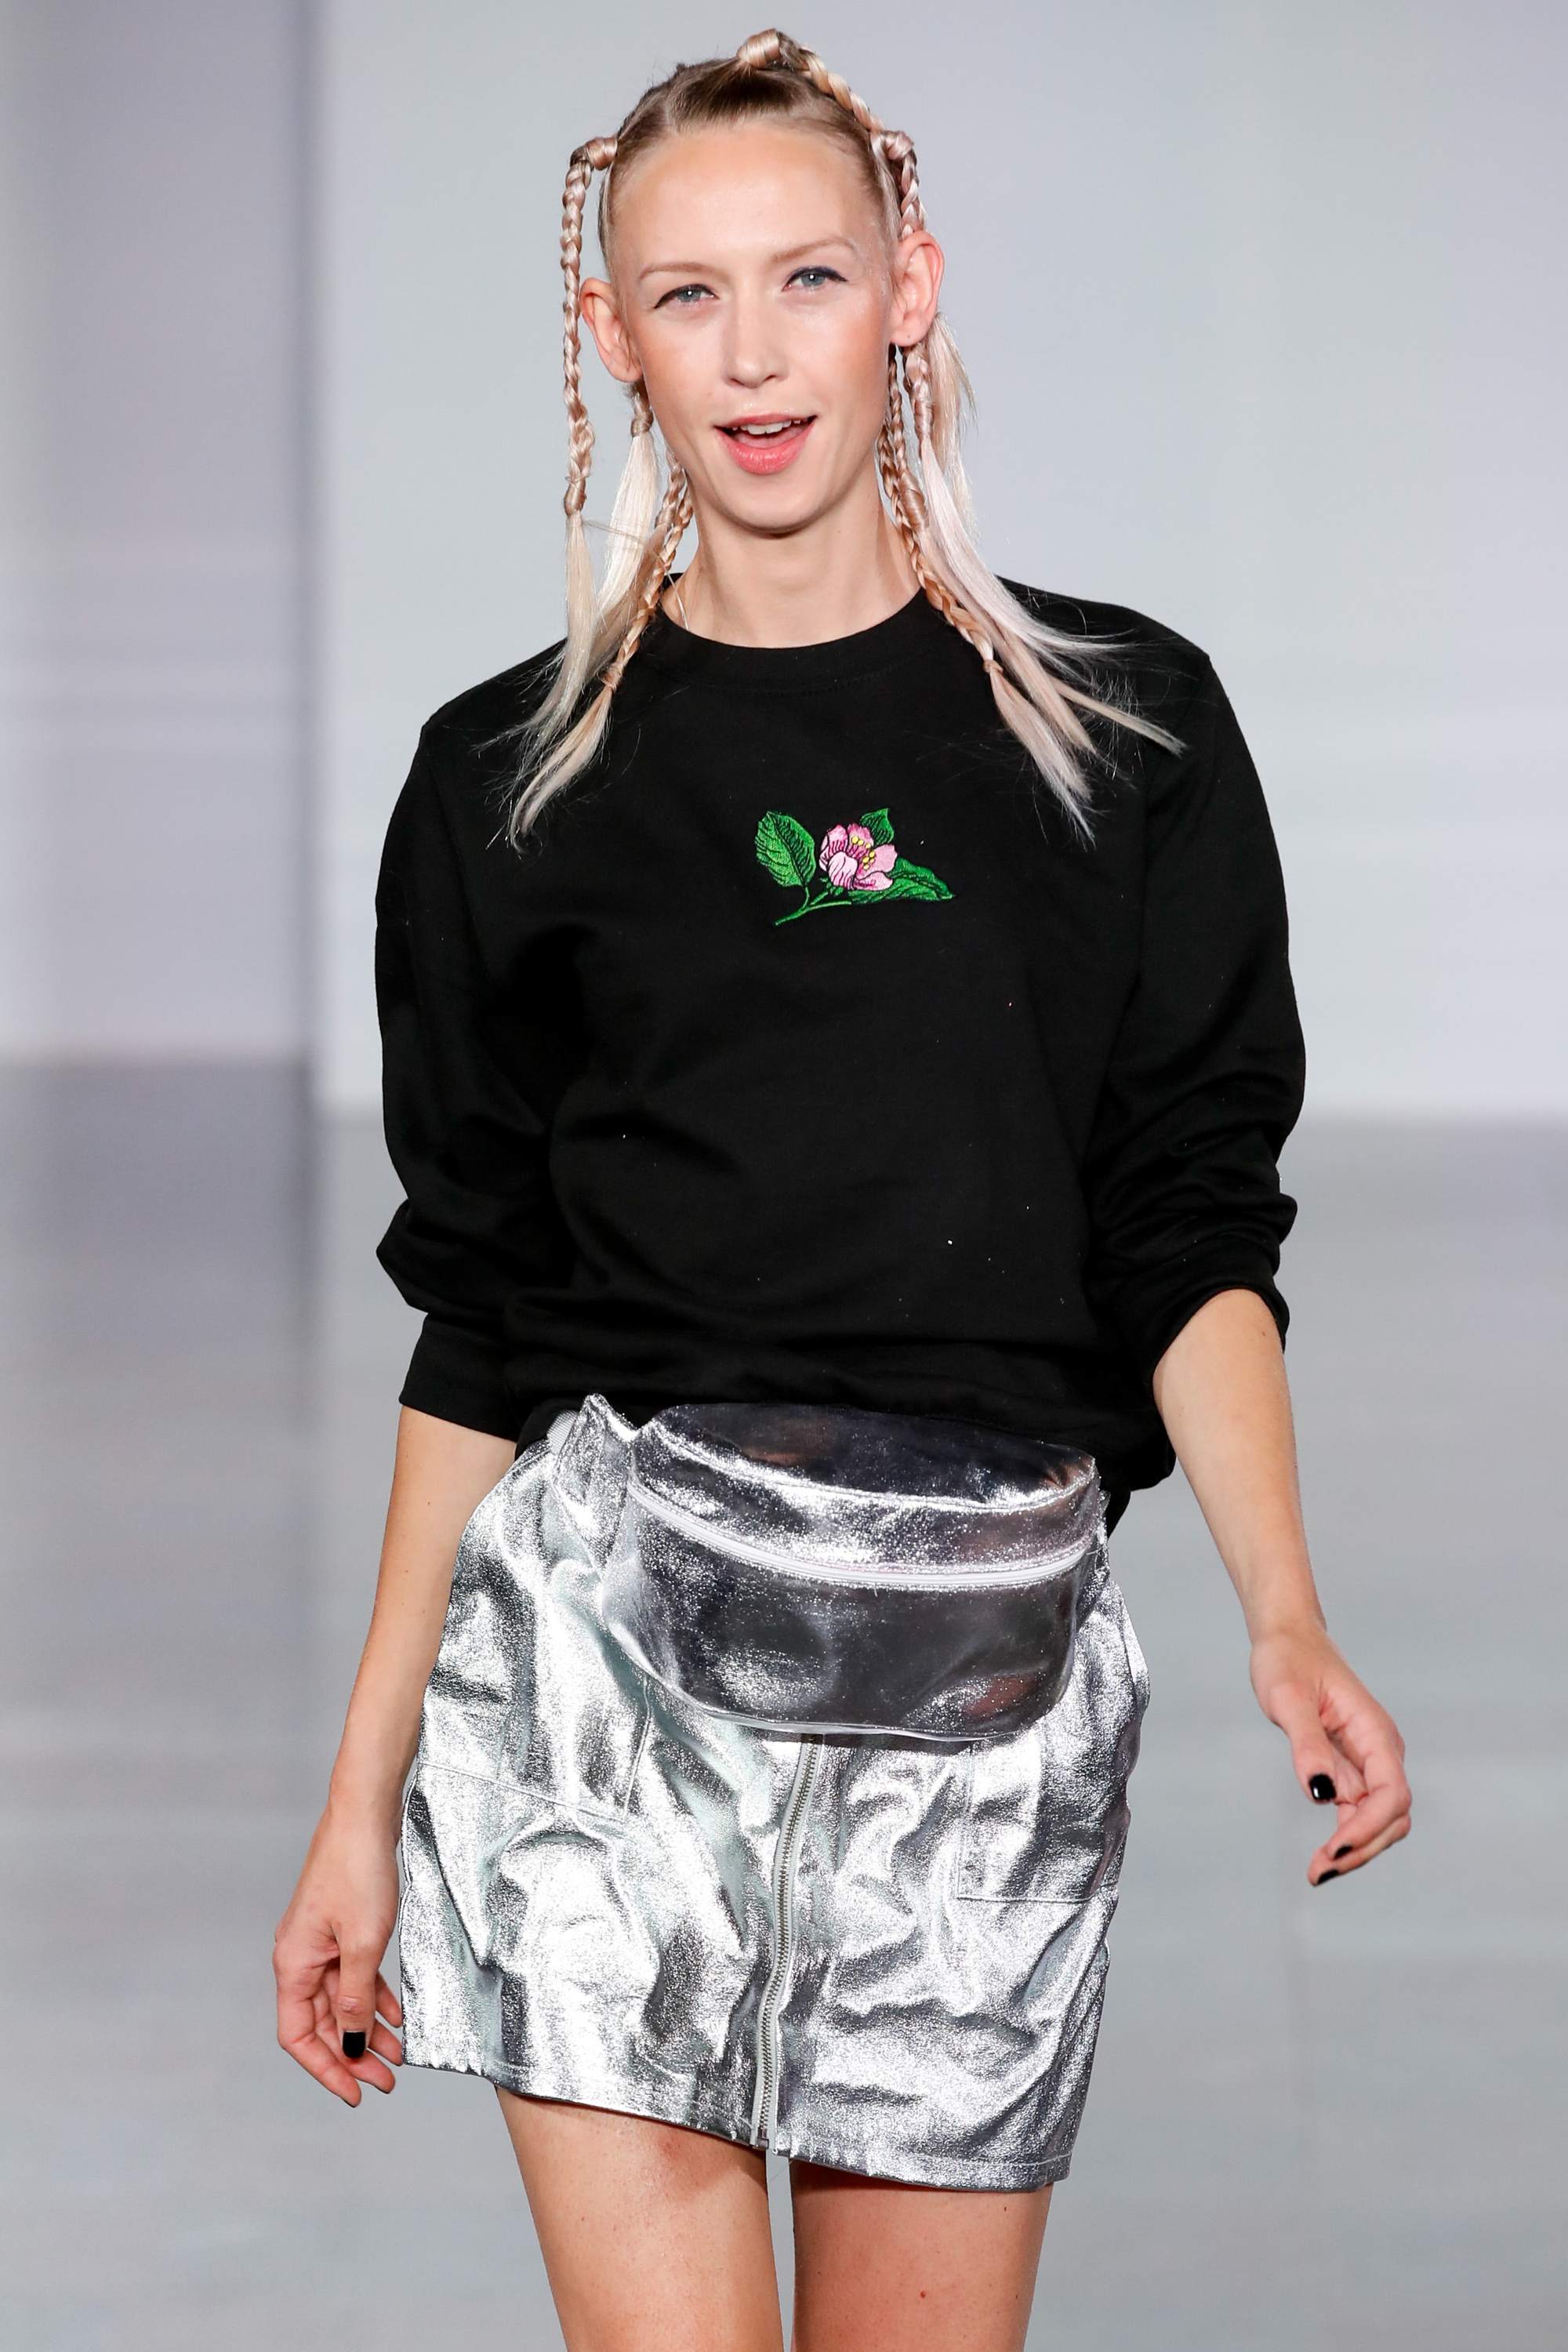 Ideas for crazy hair day: Blonde runway model with her hair in tiny random braids, wearing a black sweatshirt and silver skirt